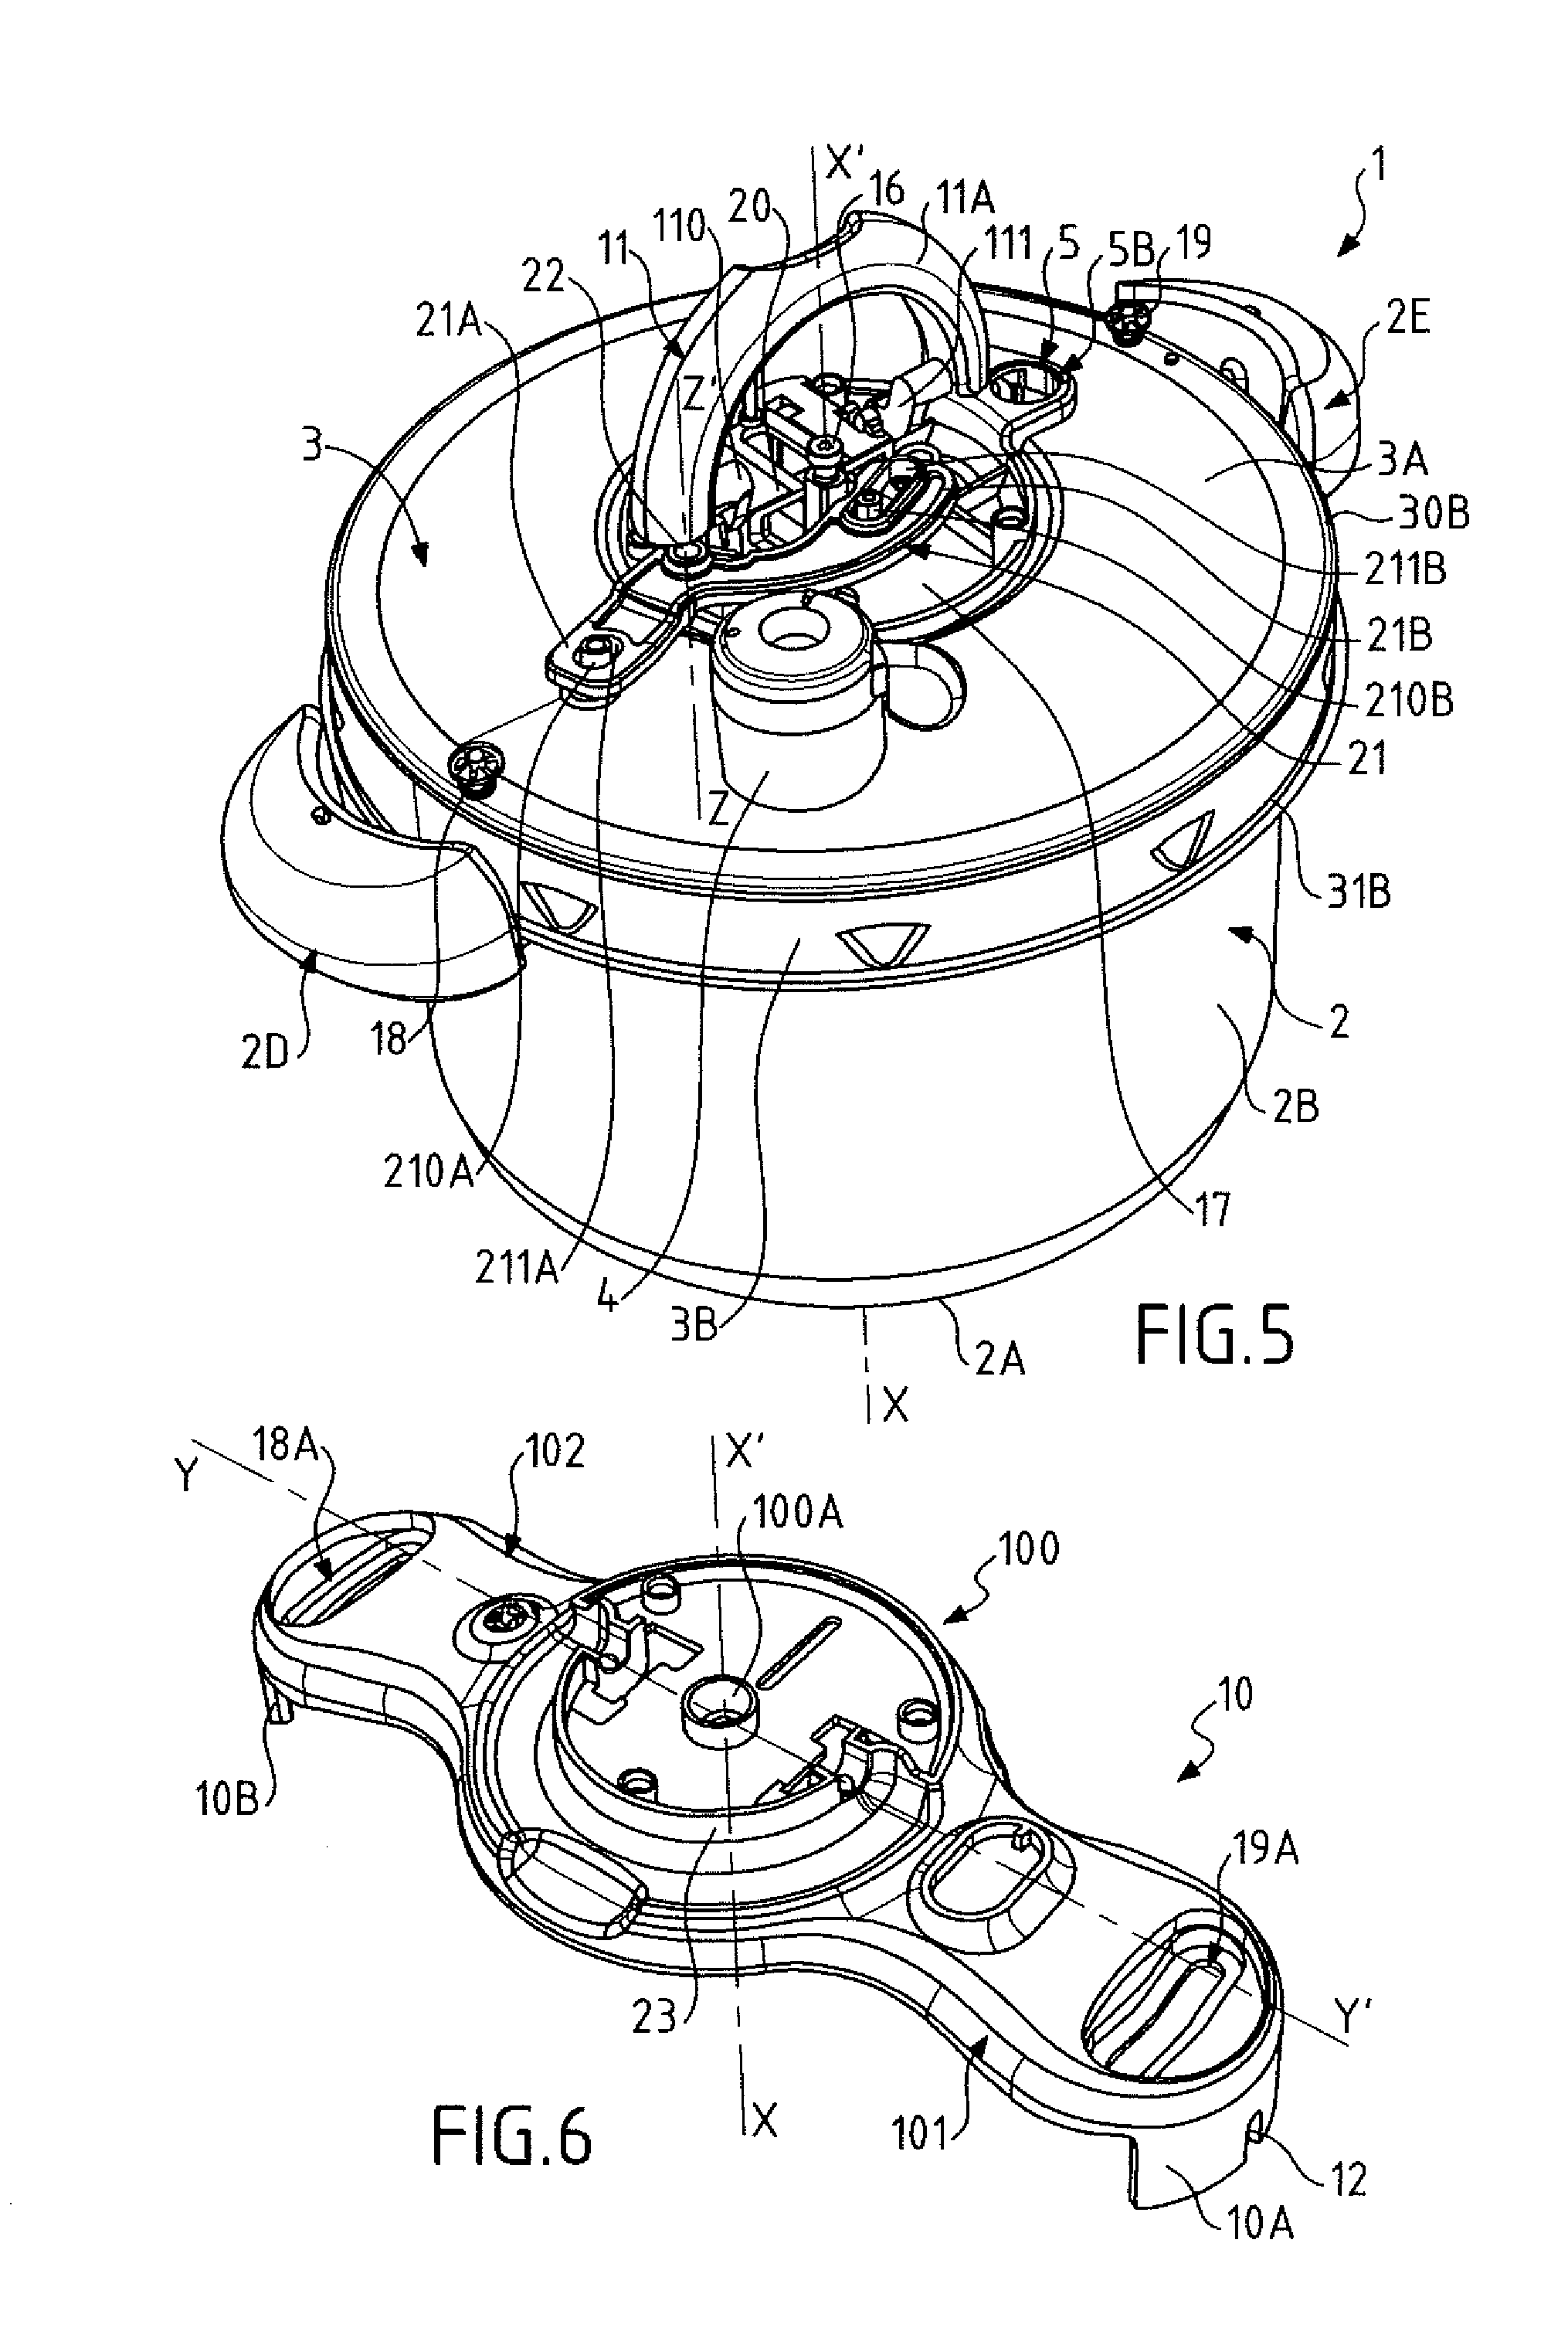 Pressure cooker provided with a manual control for controlling locking